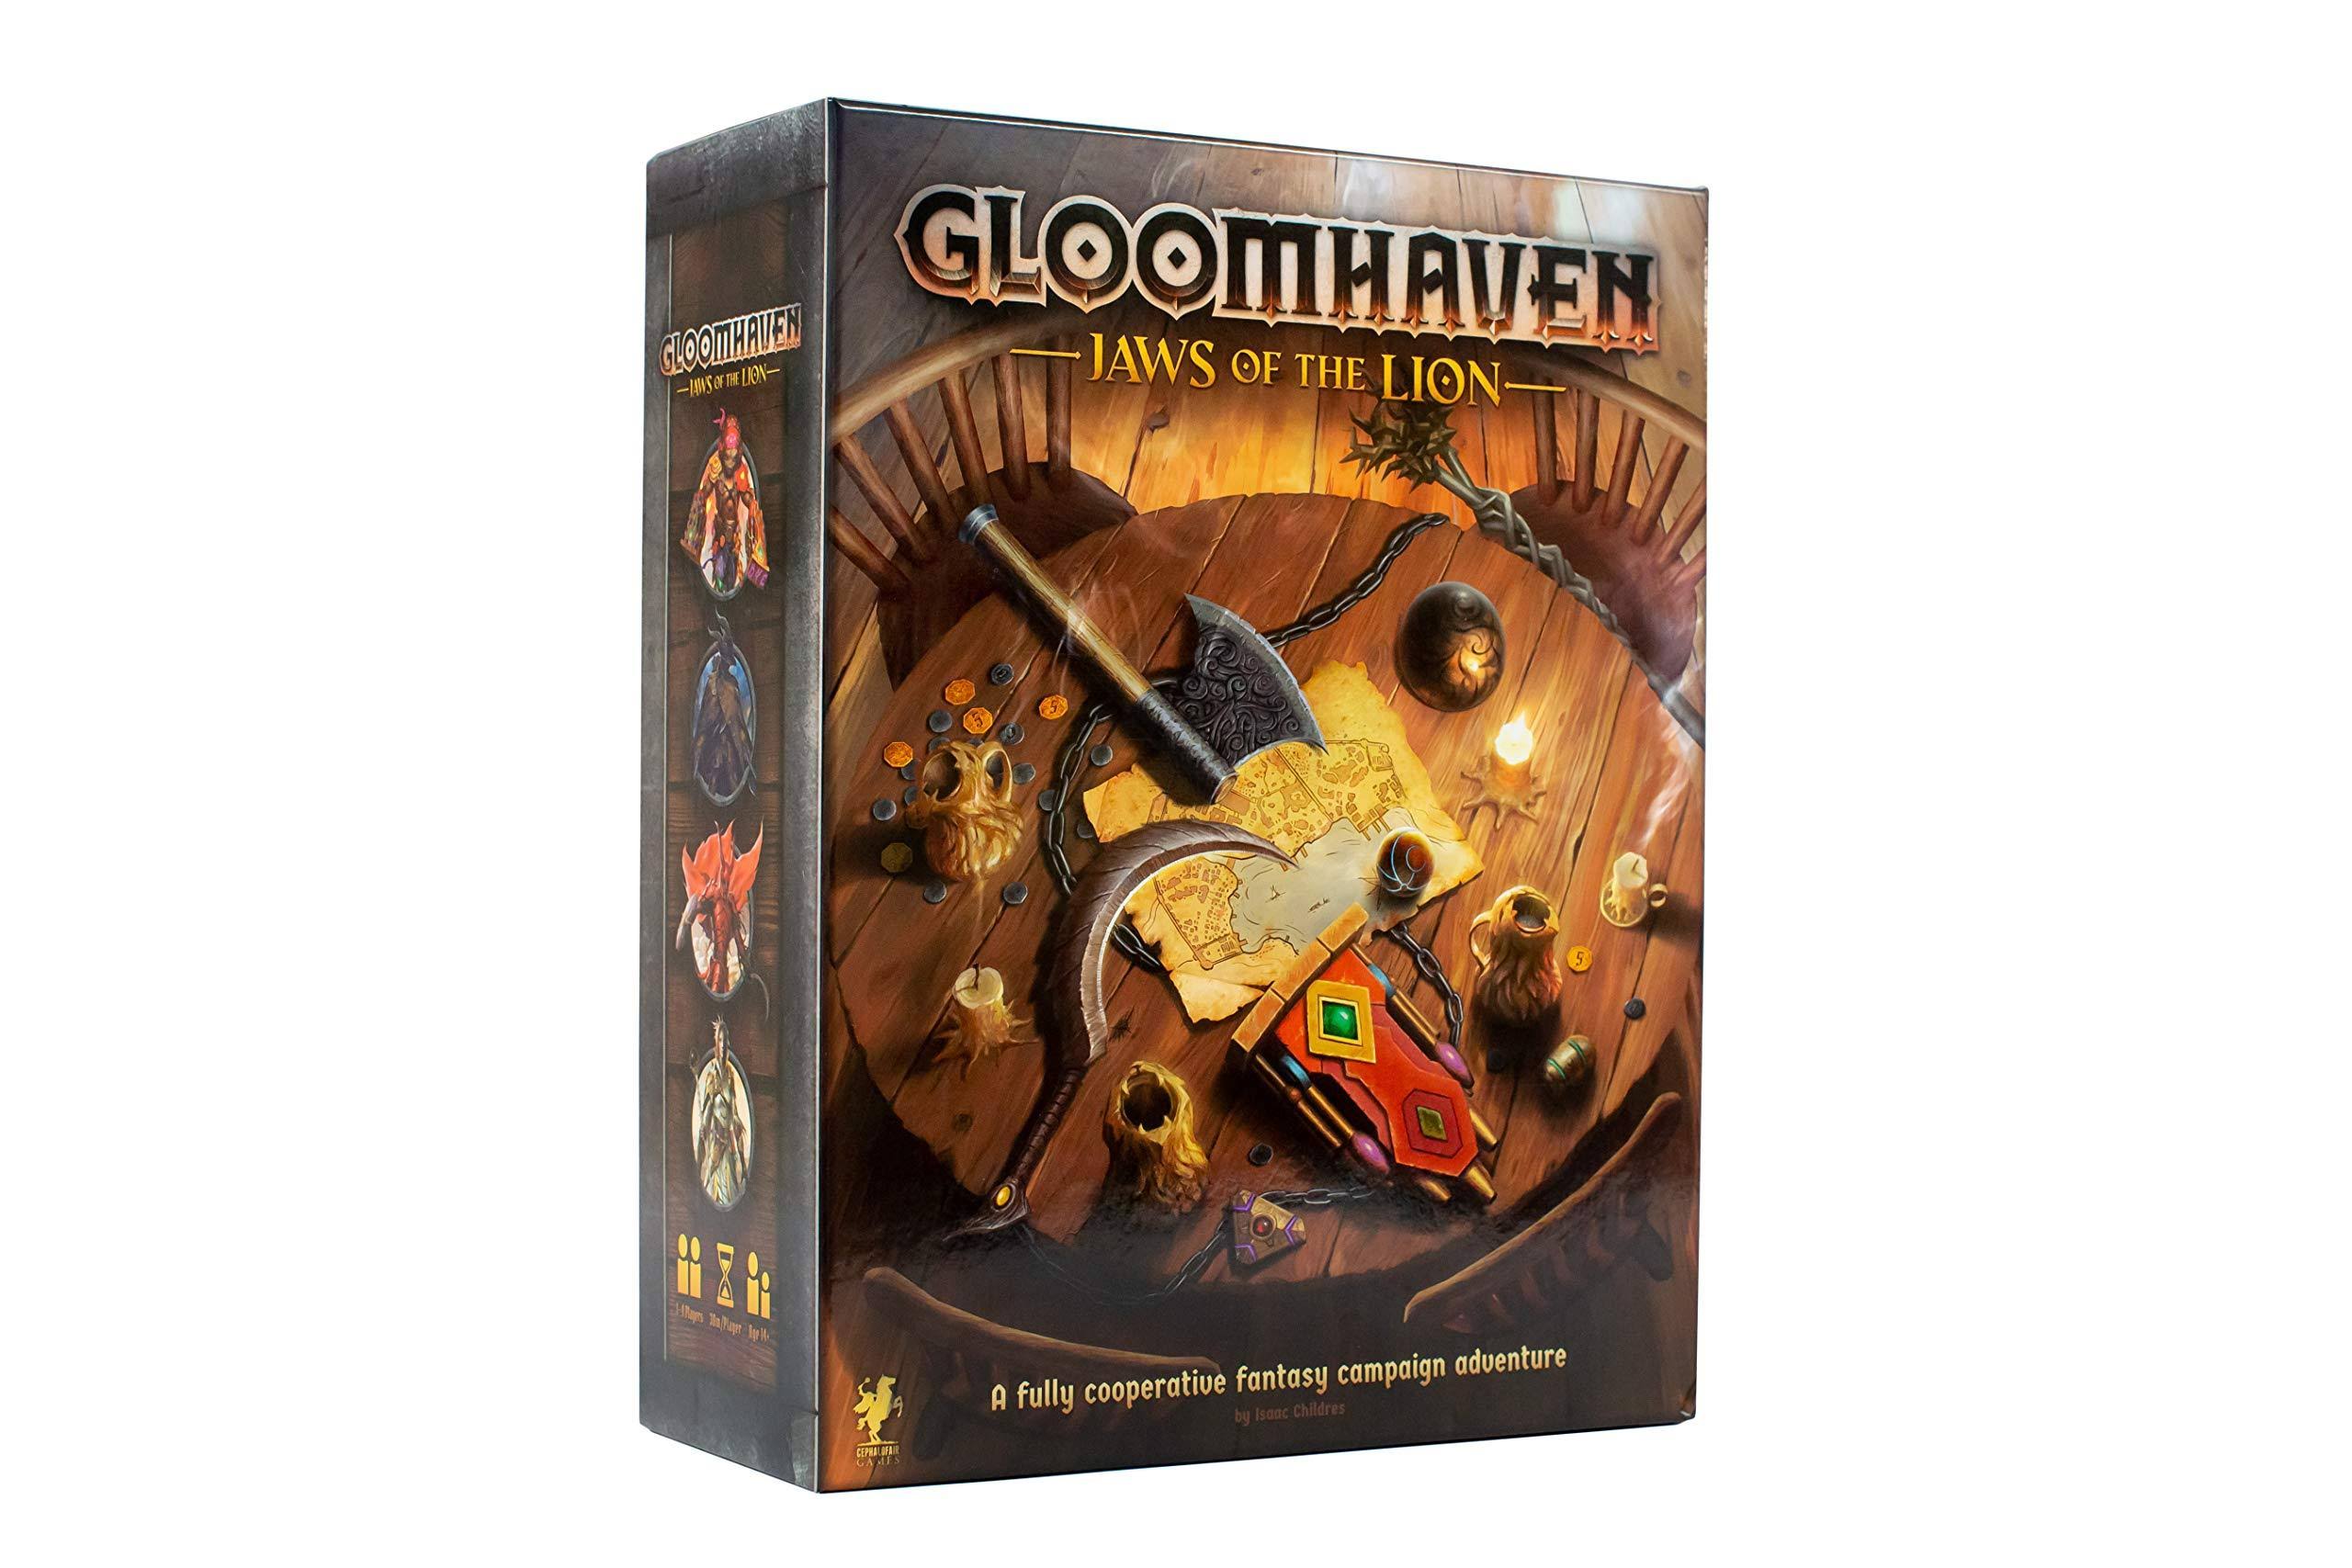 GLOOMHAVEN: Jaws of The Lion